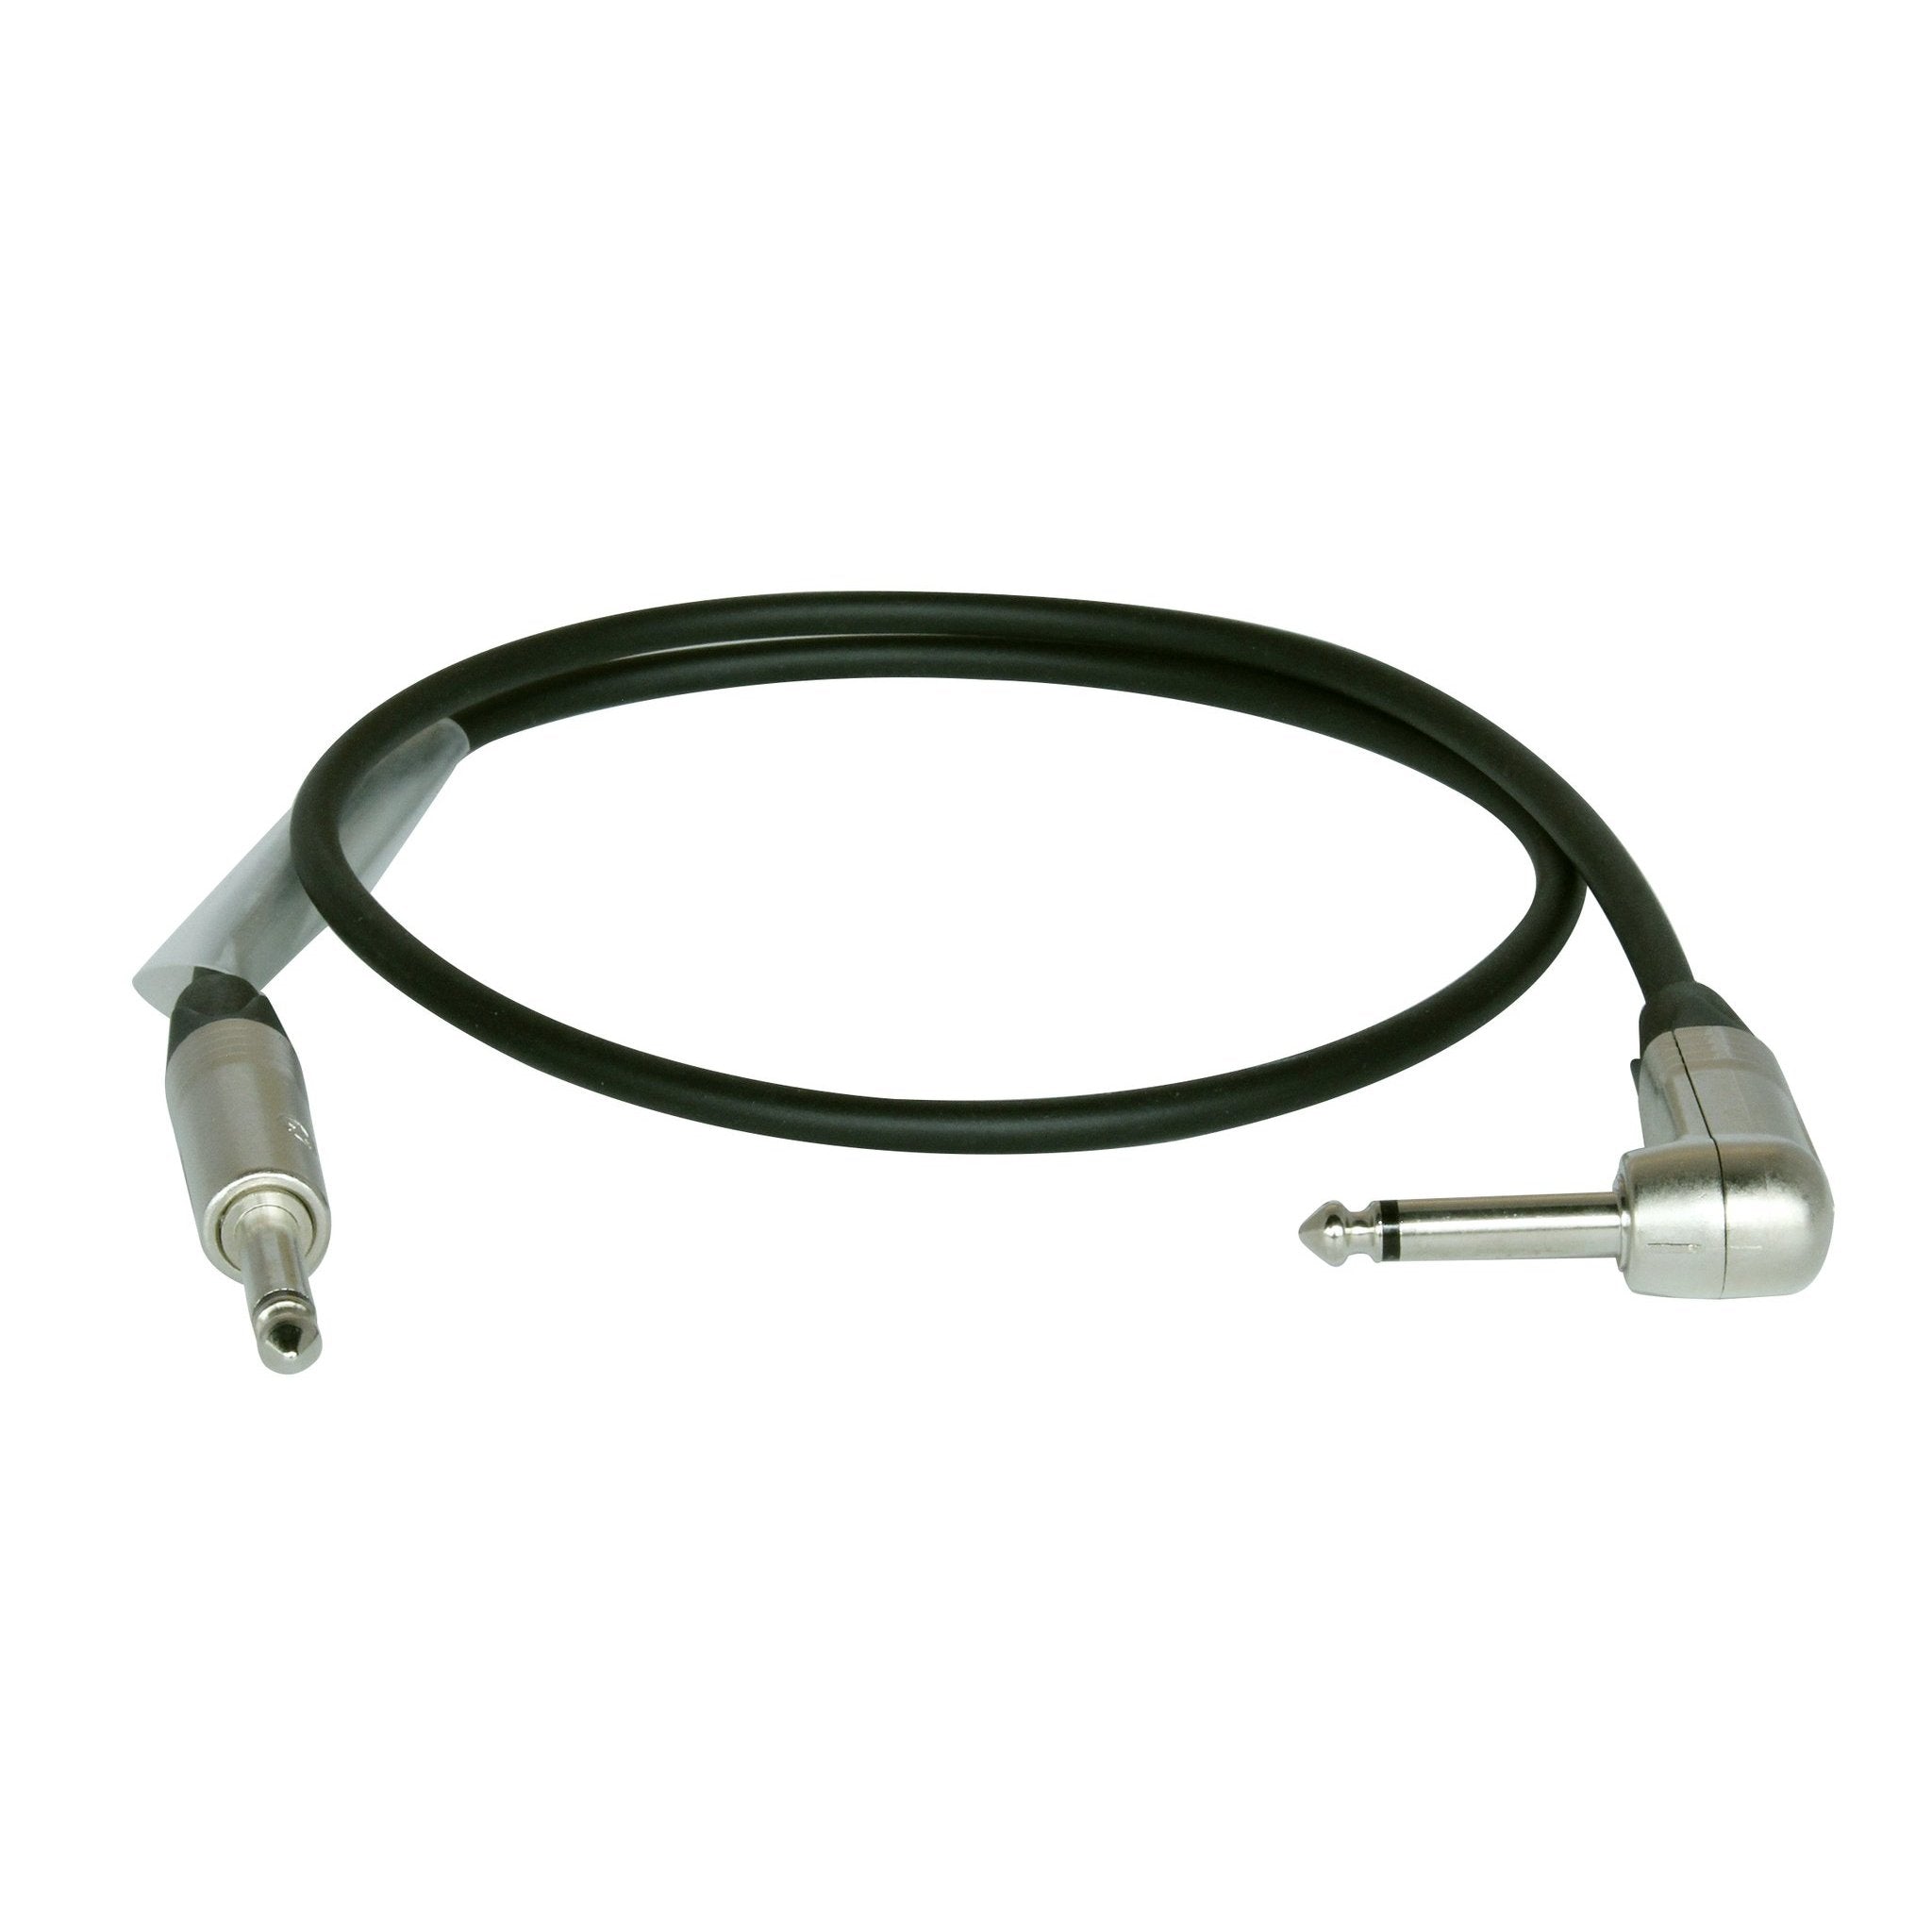 Digiflex NGP-15 Instrument Cable 1/4" Male-1/4" Male Right Angle 15ft-Music World Academy